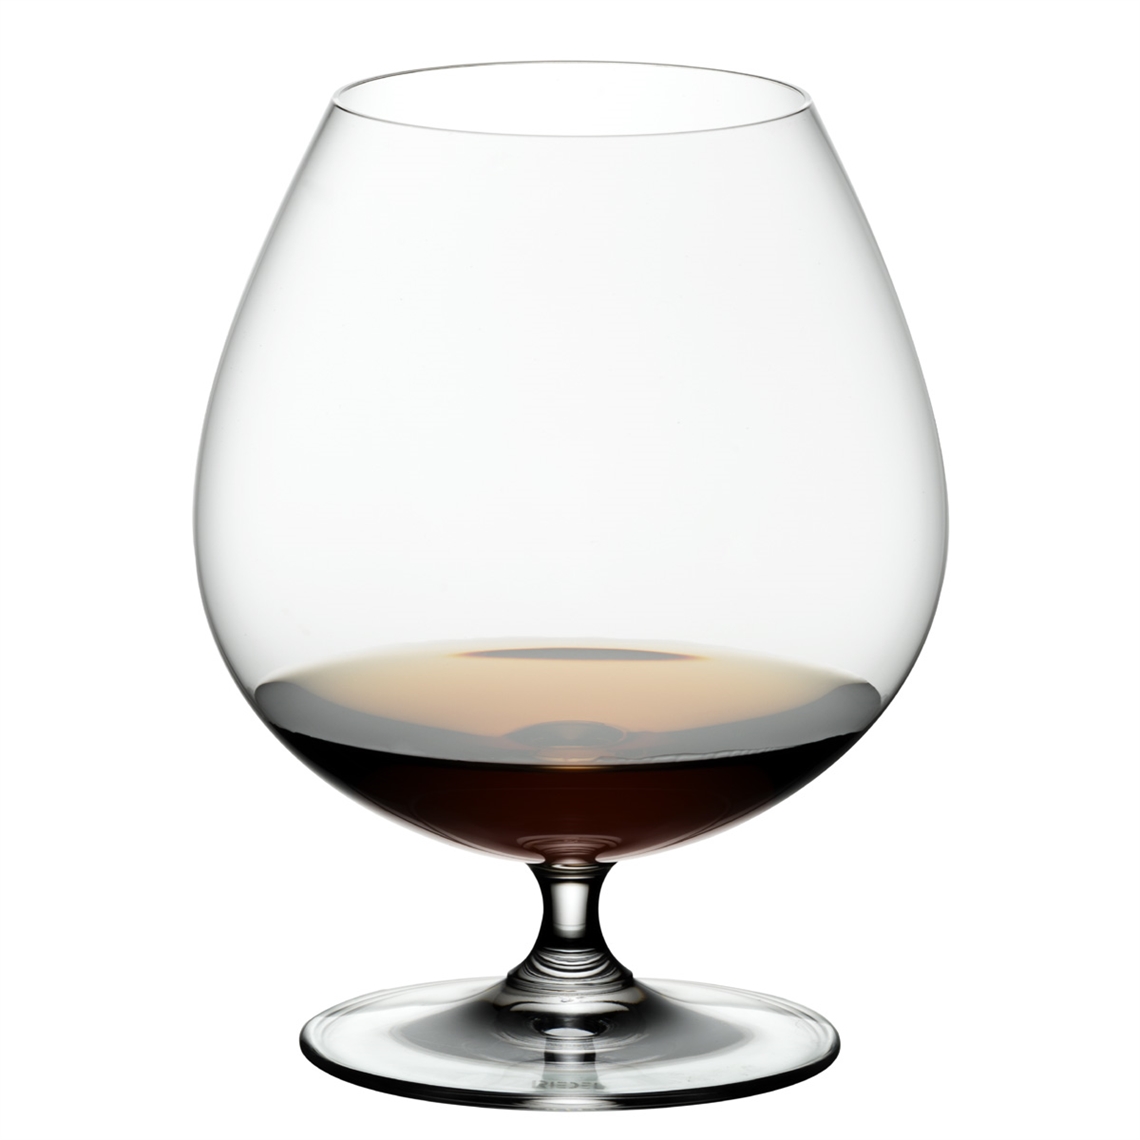 View more riedel extreme from our Spirit Glasses range